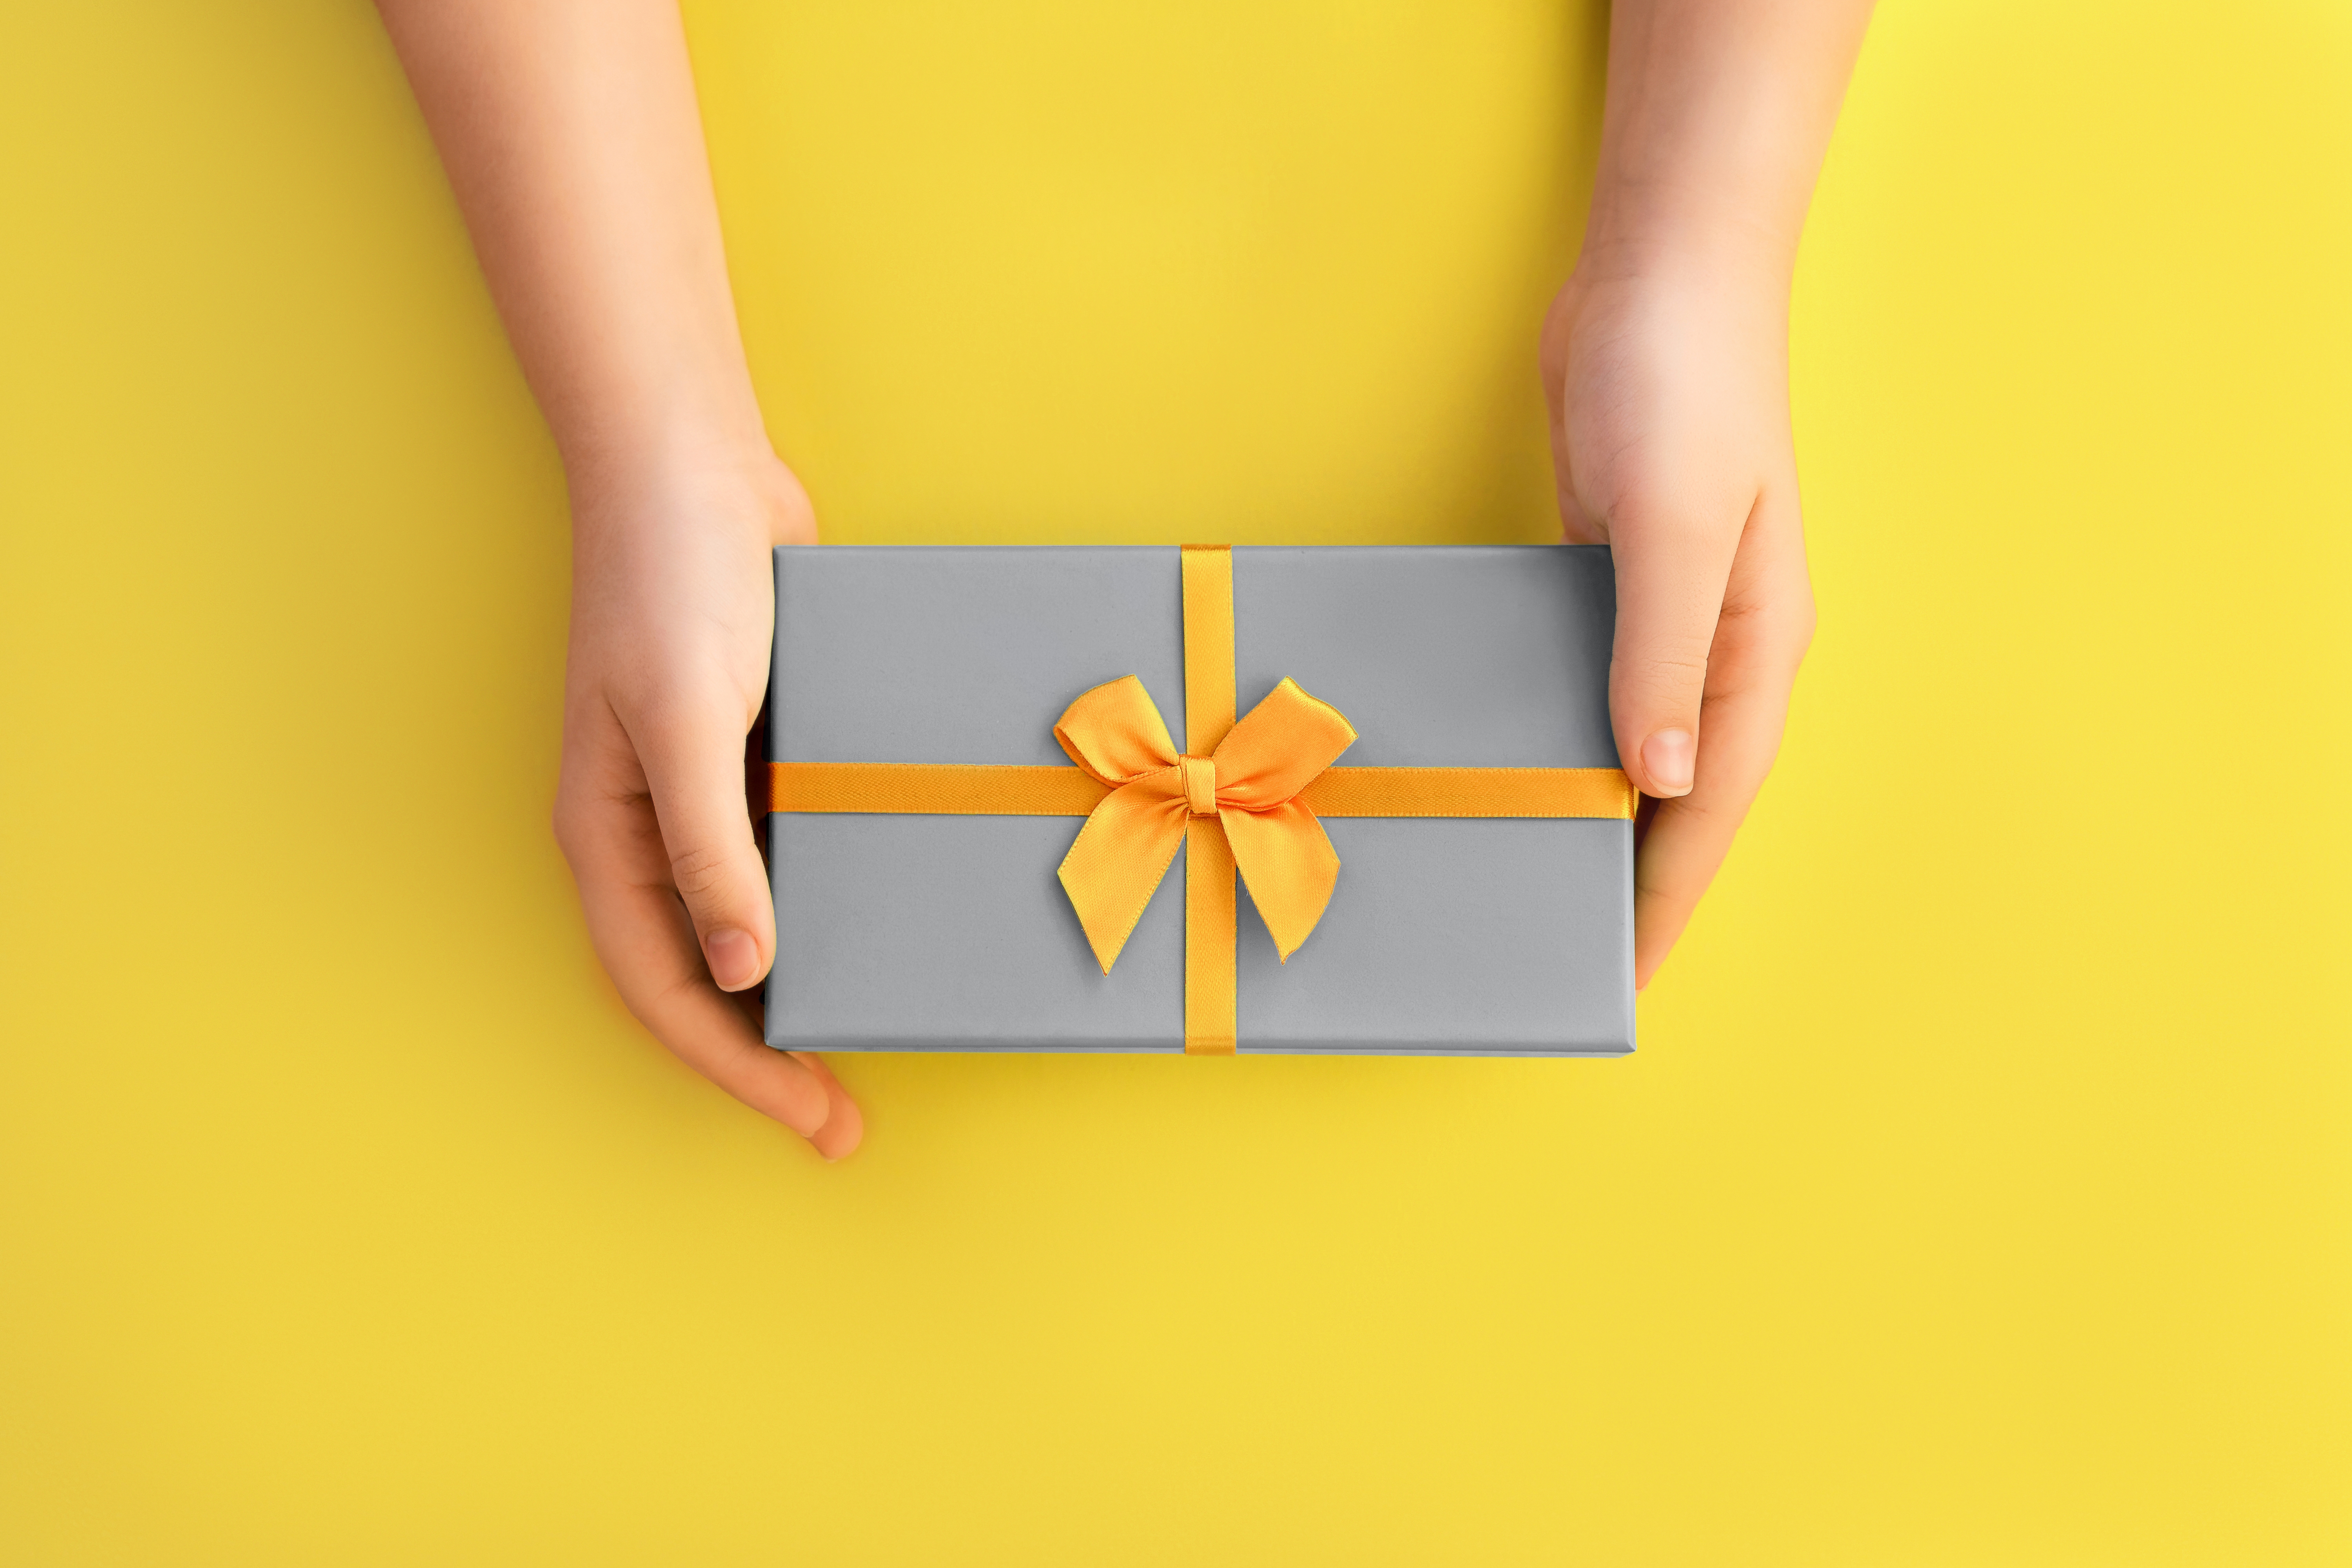 Top gift ideas for boyfriend. Two hands holding a grey gift box with yellow ribbon, on a yellow background.